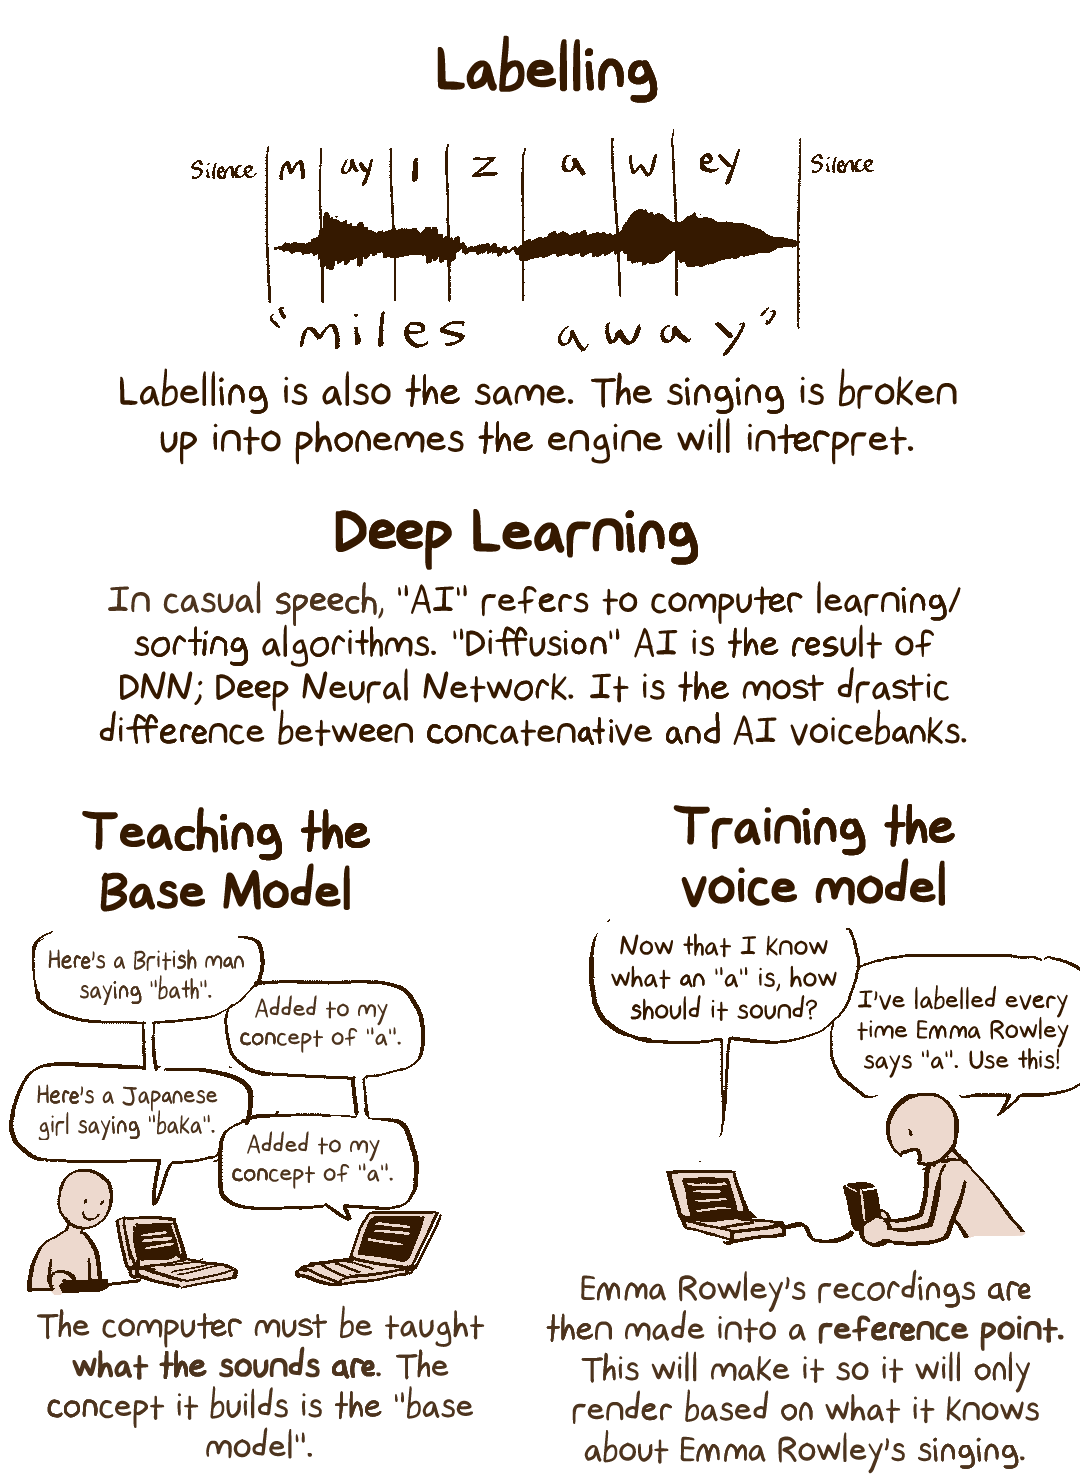 Section: Labelling. Labelling is also the same. The singing is broken up into phonemes the engine will interpret.  Header Section: Deep Learning. In casual speech, "AI" refers to computer learning/sorting algorithms. "Diffusion" AI is the result of DNN; Deep Neural Network. It is the most drastic difference between concatenative and AI voicebanks. Section: Teaching the base model. The computer must be taught what the sounds are. The concept it builds is the "base model". (Visual guide is a cartoon of two computers talking. "Here's a british man saying 'bath'." "Added to my concept of 'a'." "Here's a Japanese girl saying 'baka'." "Added to my concept of 'a'.") Section: Training the voice model. Emma Rowley's recordings are then made into a reference point. This will make it so it will only render based on what it knows about Emma Rowley's singing. (Visual aid is a similar cartoon where a person talks to a computer while giving it a drive. Computer: "Now that I know what 'a' is, how should it sound?" Person: "I've labelled every time Emma Rowley says 'a'. Use this!")